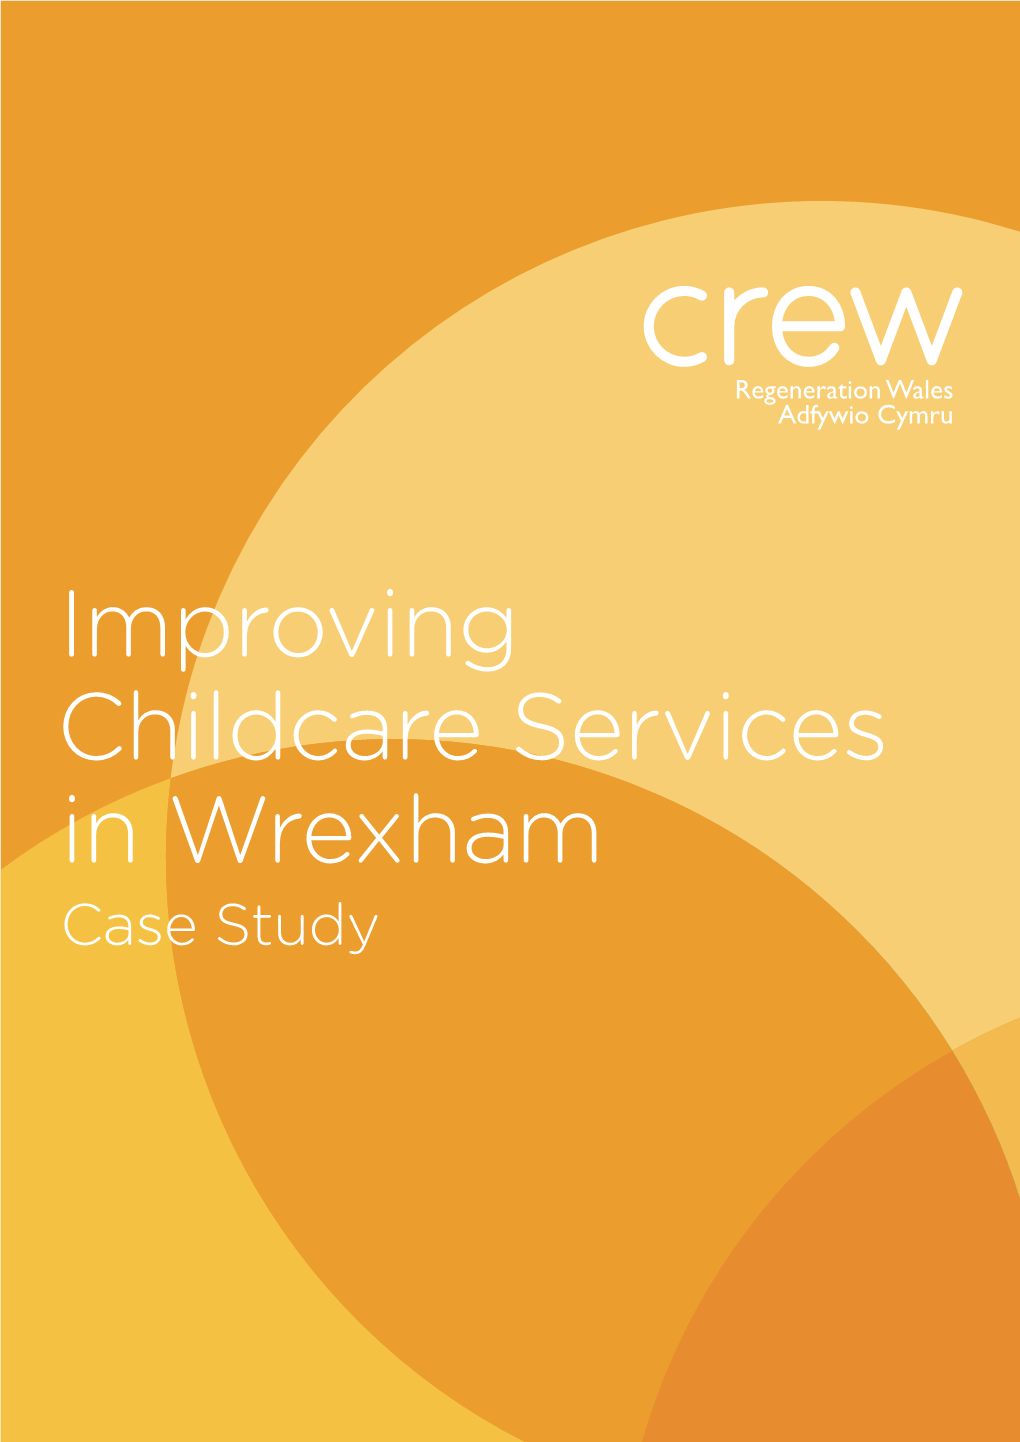 Improving Childcare Services in Wrexham